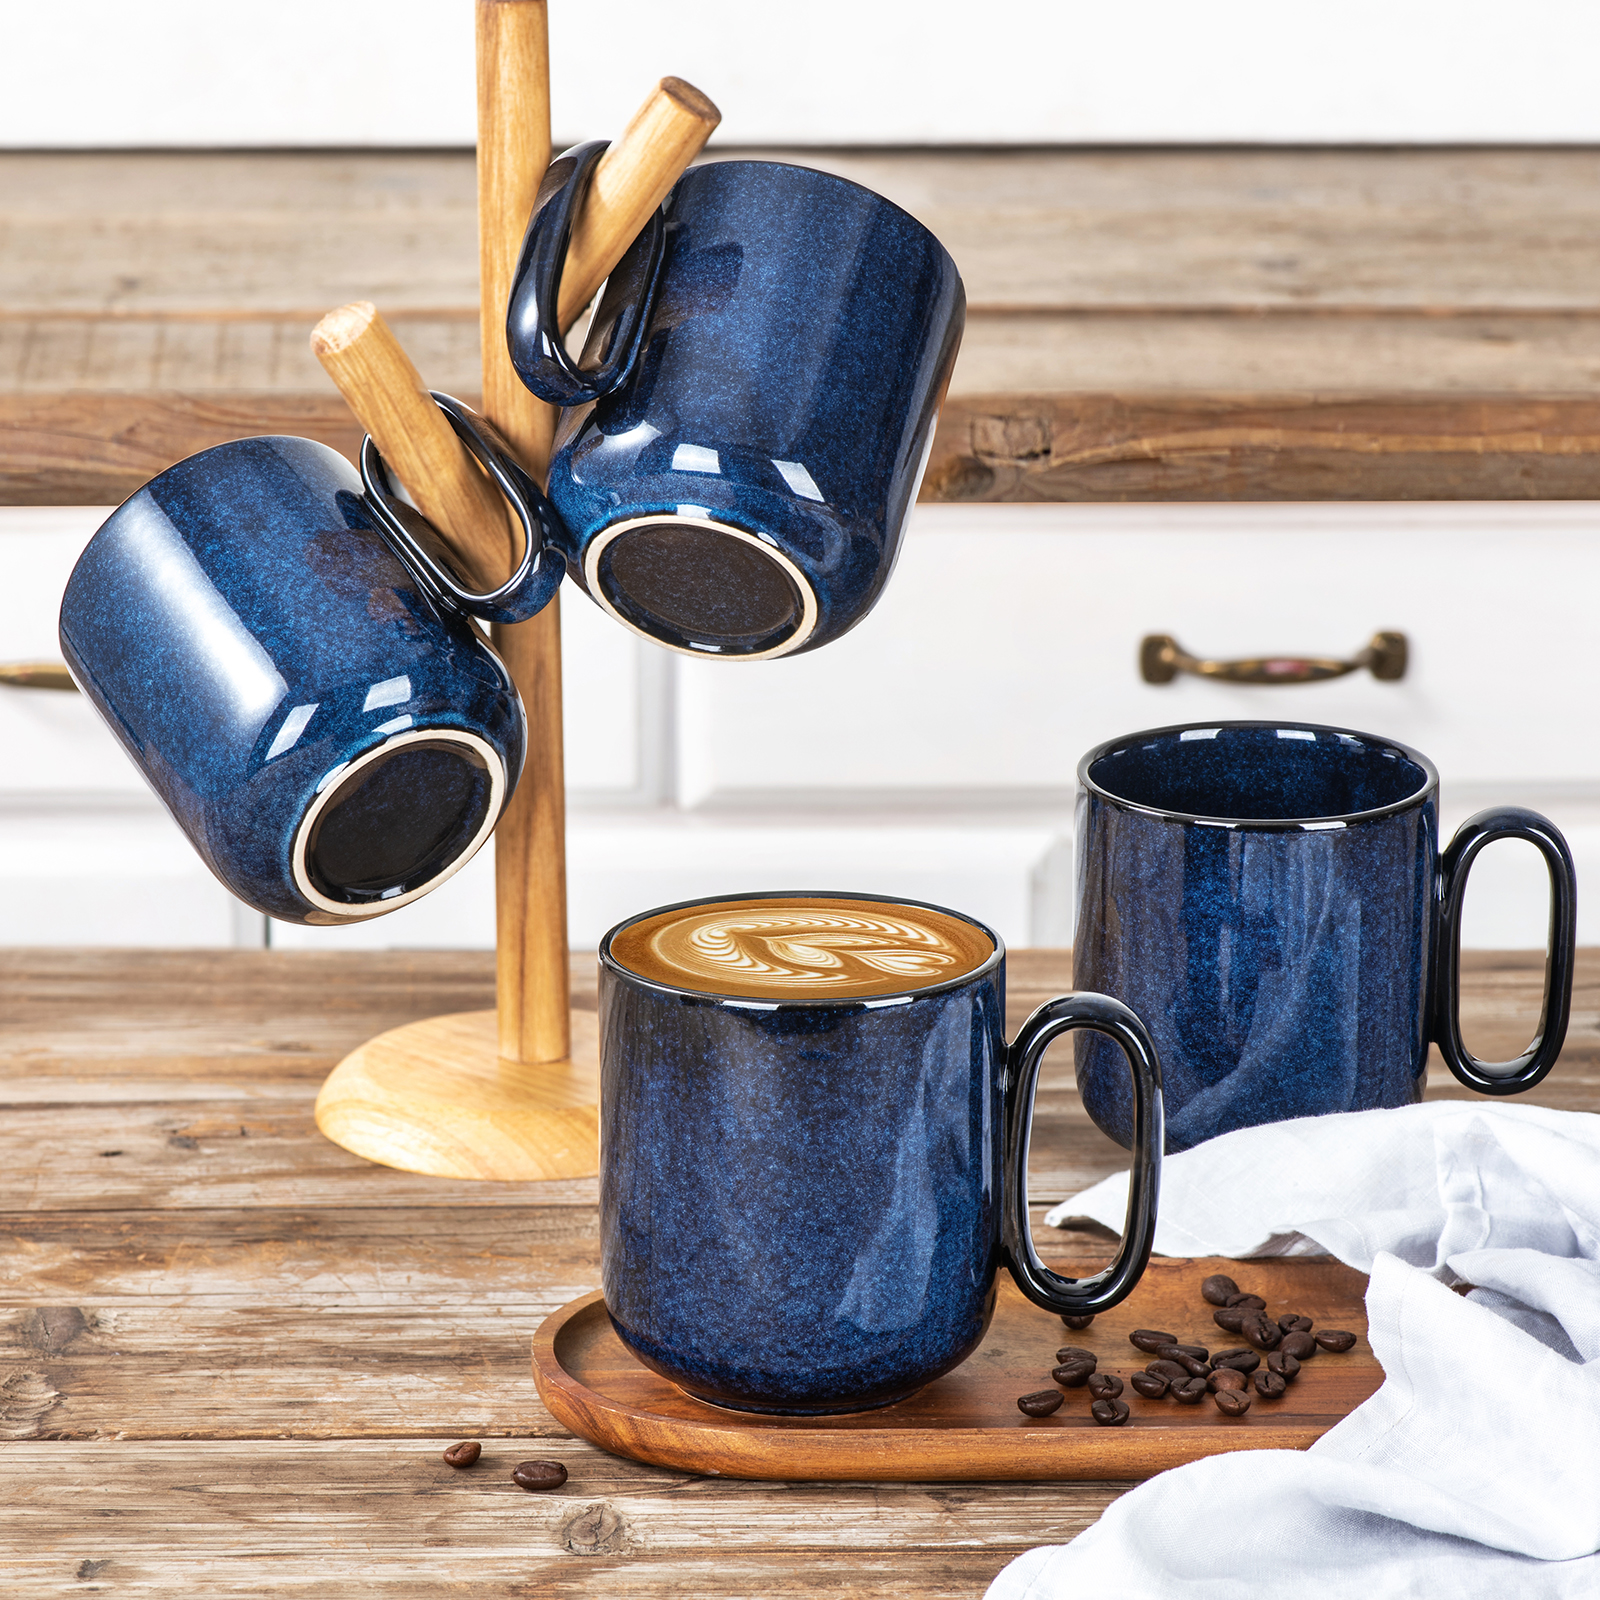 Starry Blue 6.5 oz Cappuccino Cups with Saucers, Set of 4, Ceramic Coffee  Cup for Au Lait, Double shot, Latte, Cafe Mocha, Tea, Starry Blue - Vicrays  Ceramics